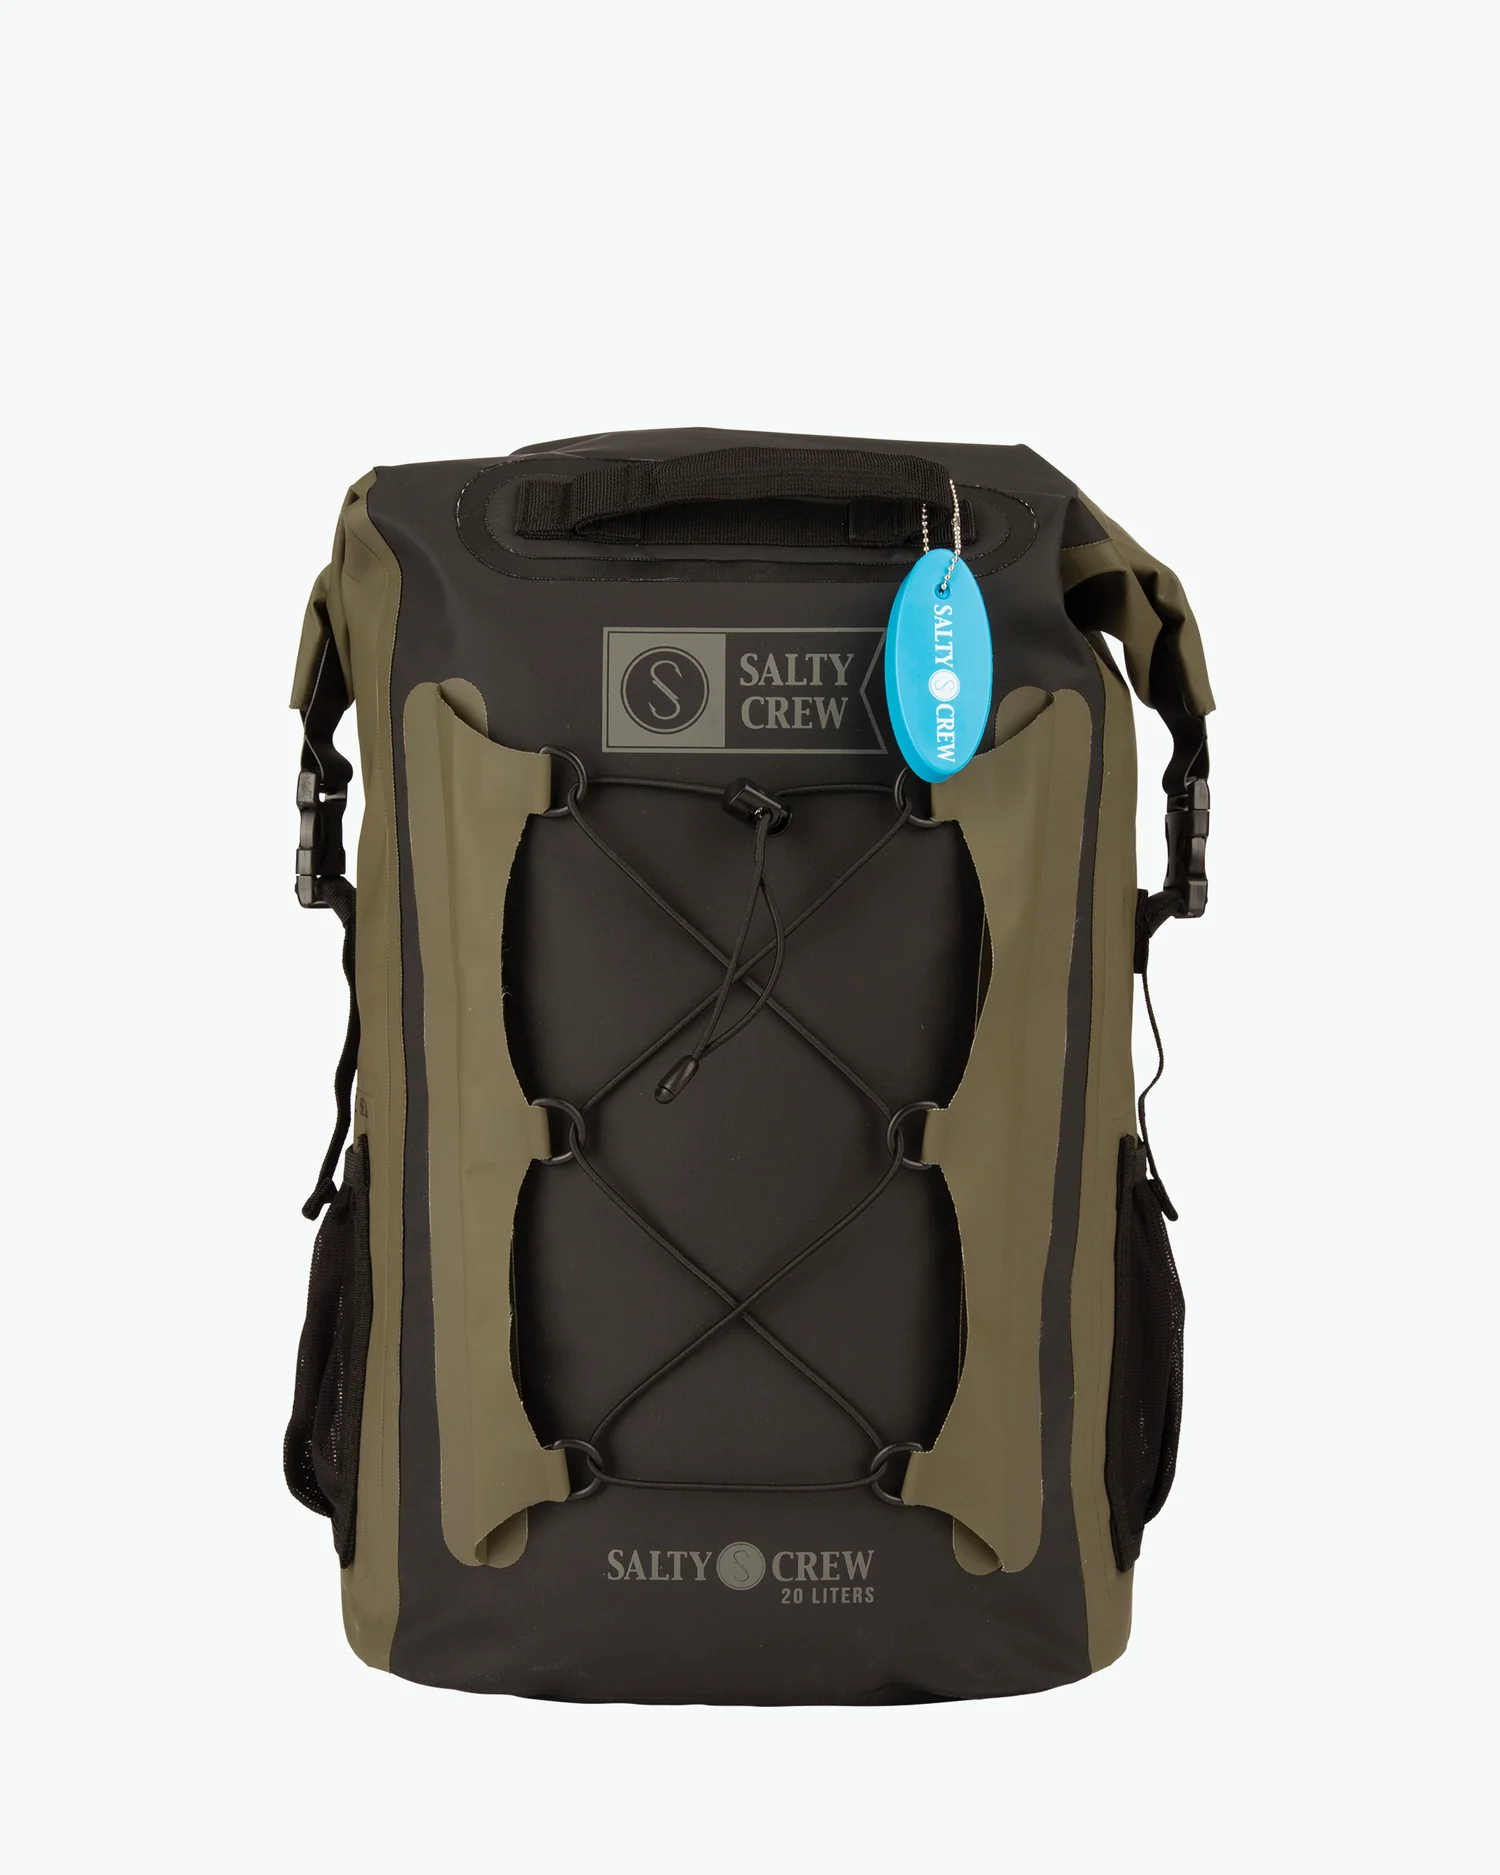 Salty Crew Voyager Roll Top Backpack